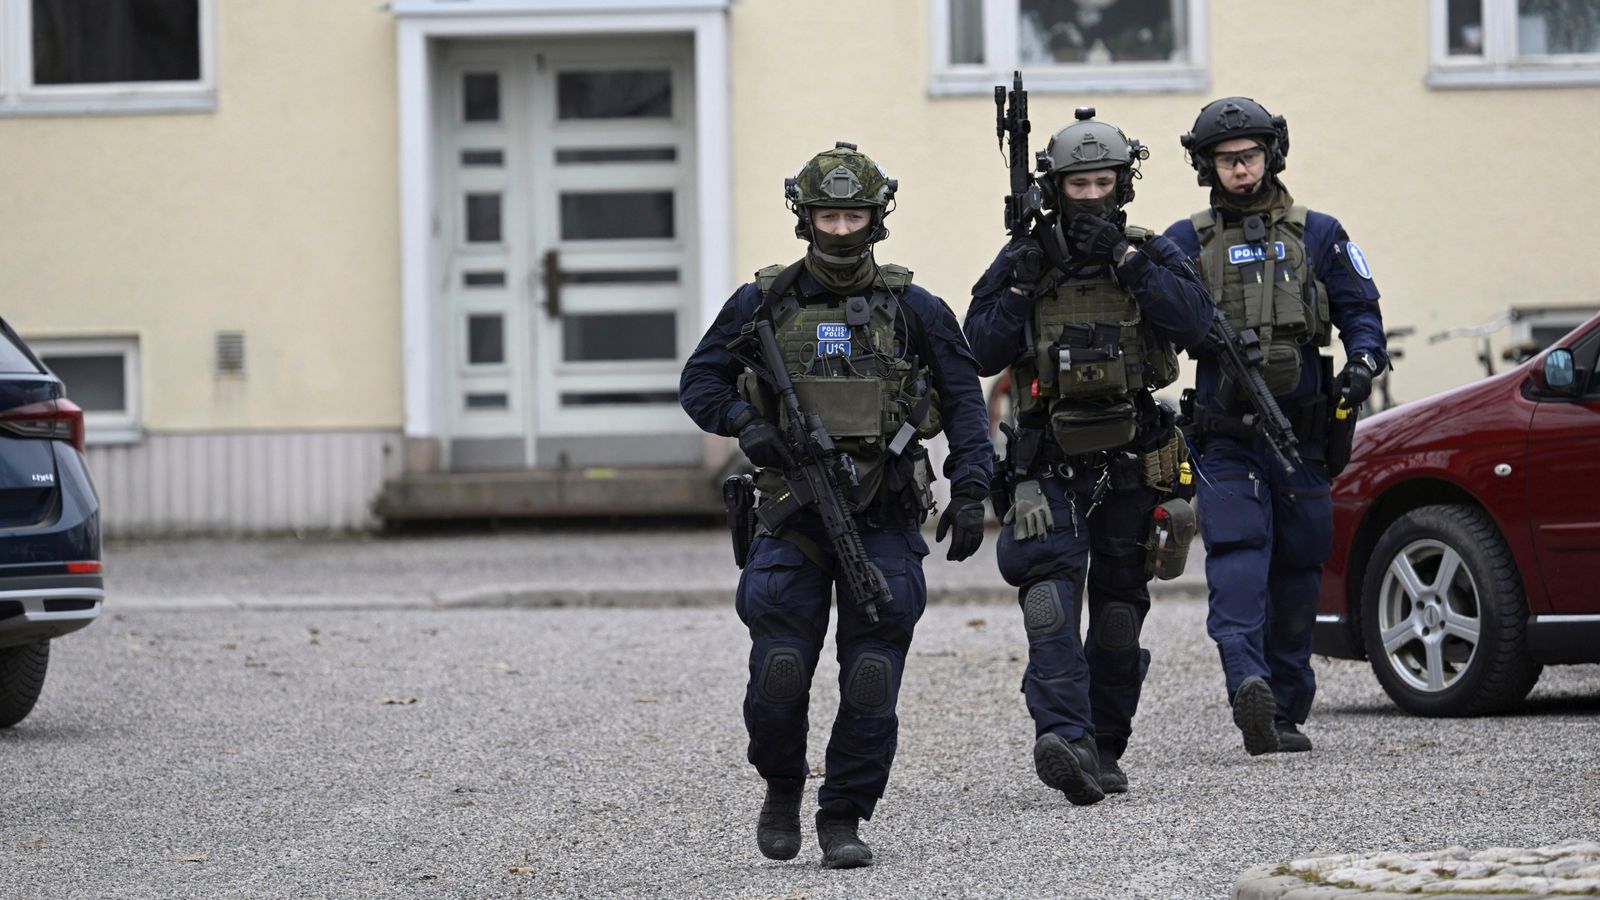 Child killed and two injured in Finland school shooting as suspect arrested